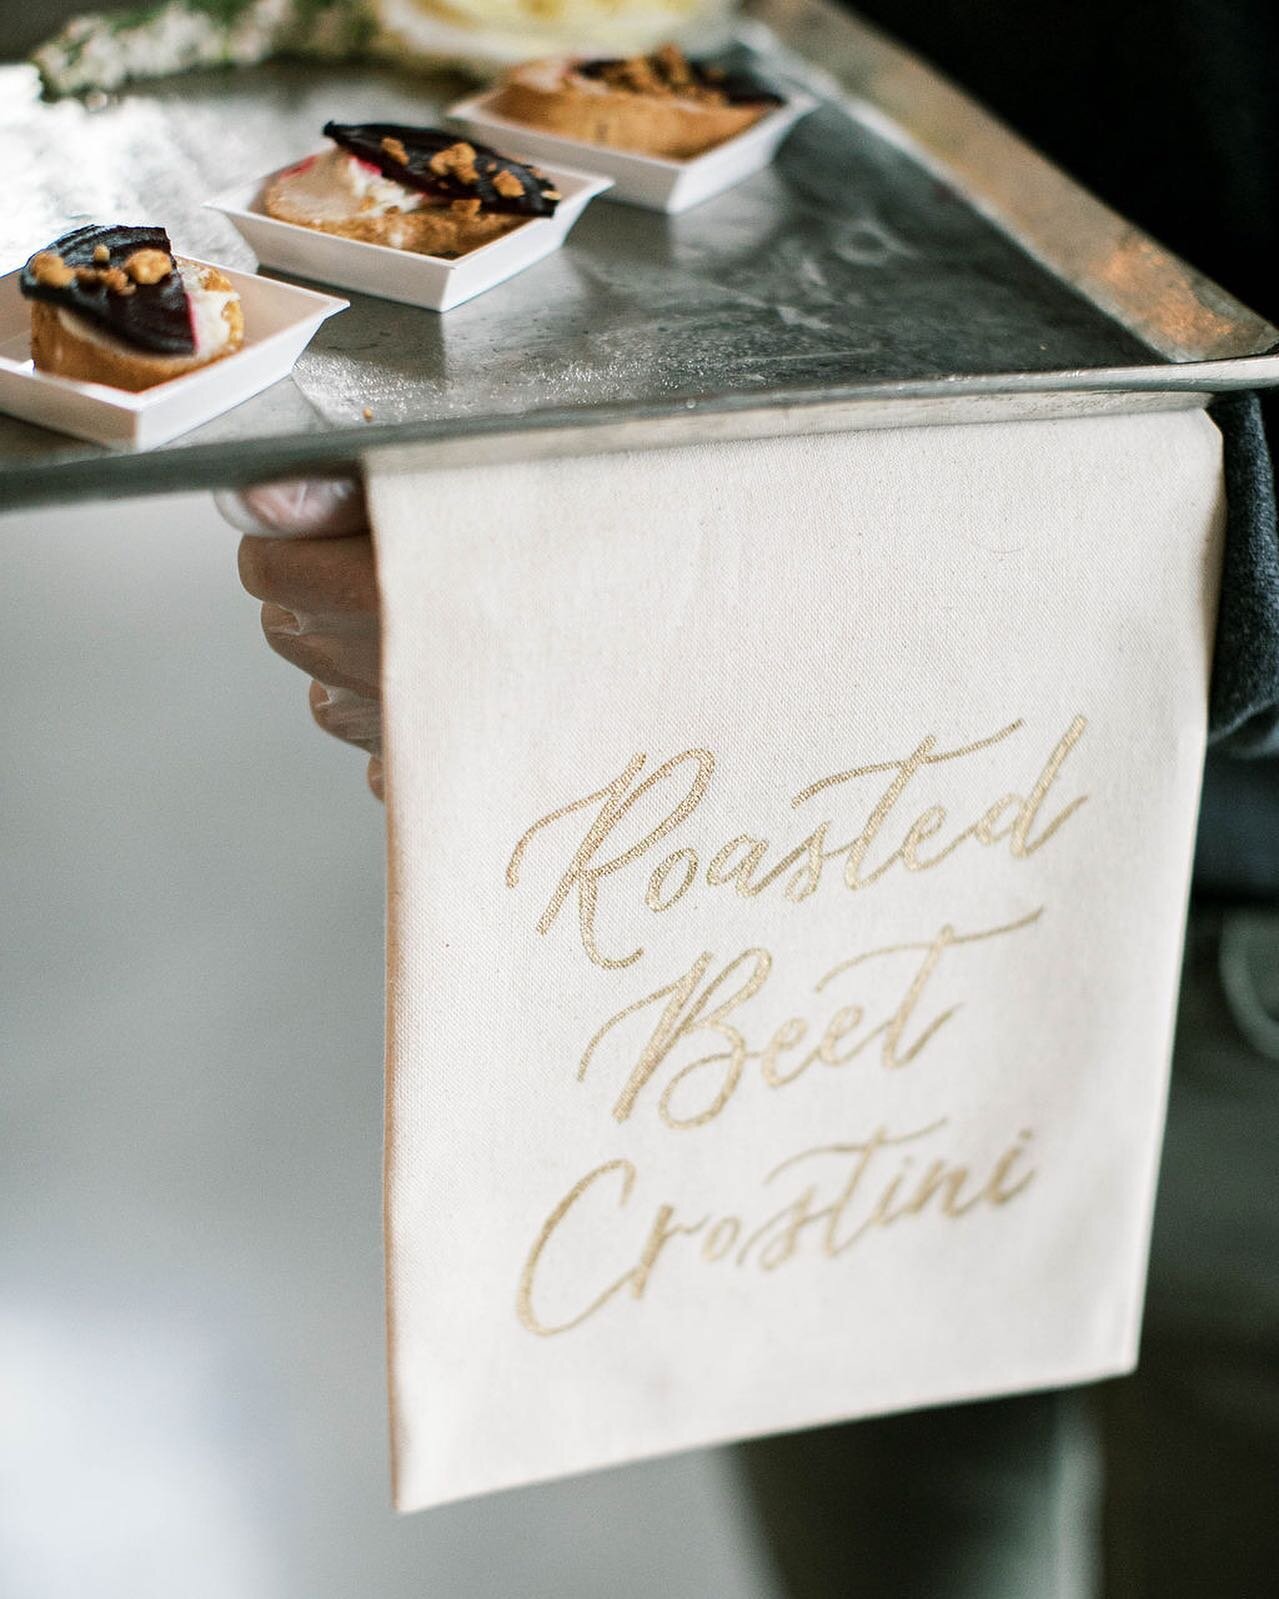 What&rsquo;s trending right now? Glad you asked. Tented cards are OUT and custom server tea towels are IN!  We are coming in hot this season with by-hand calligraphy menu descriptions and matching event fabric - y&rsquo;all keeping up yet? 📈
⠀⠀⠀⠀⠀⠀⠀